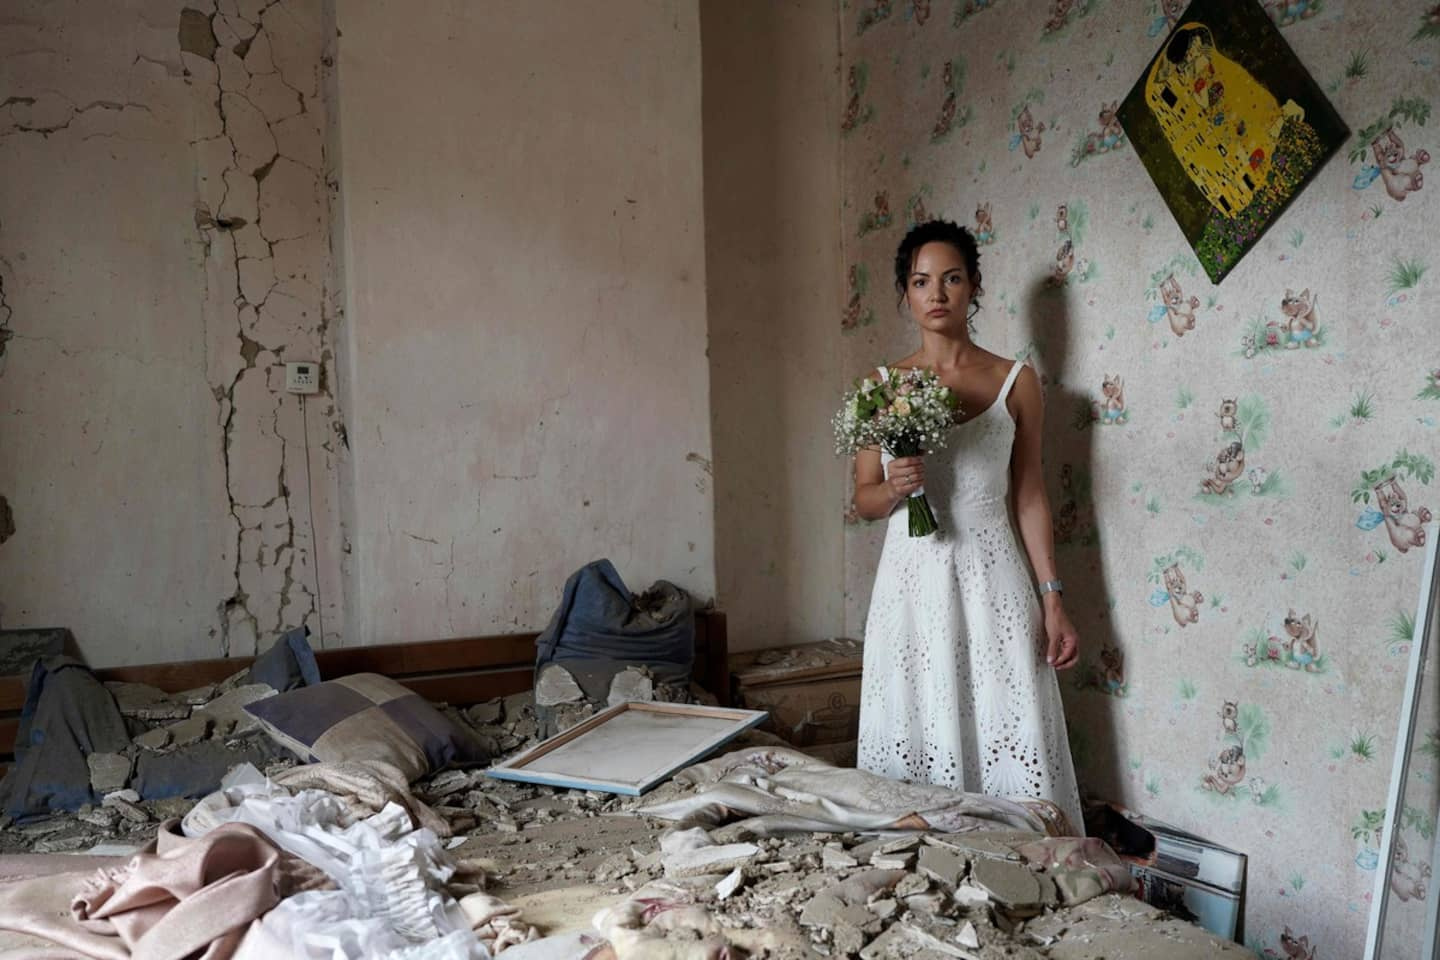 War or not, Ukrainians are rushing to get married